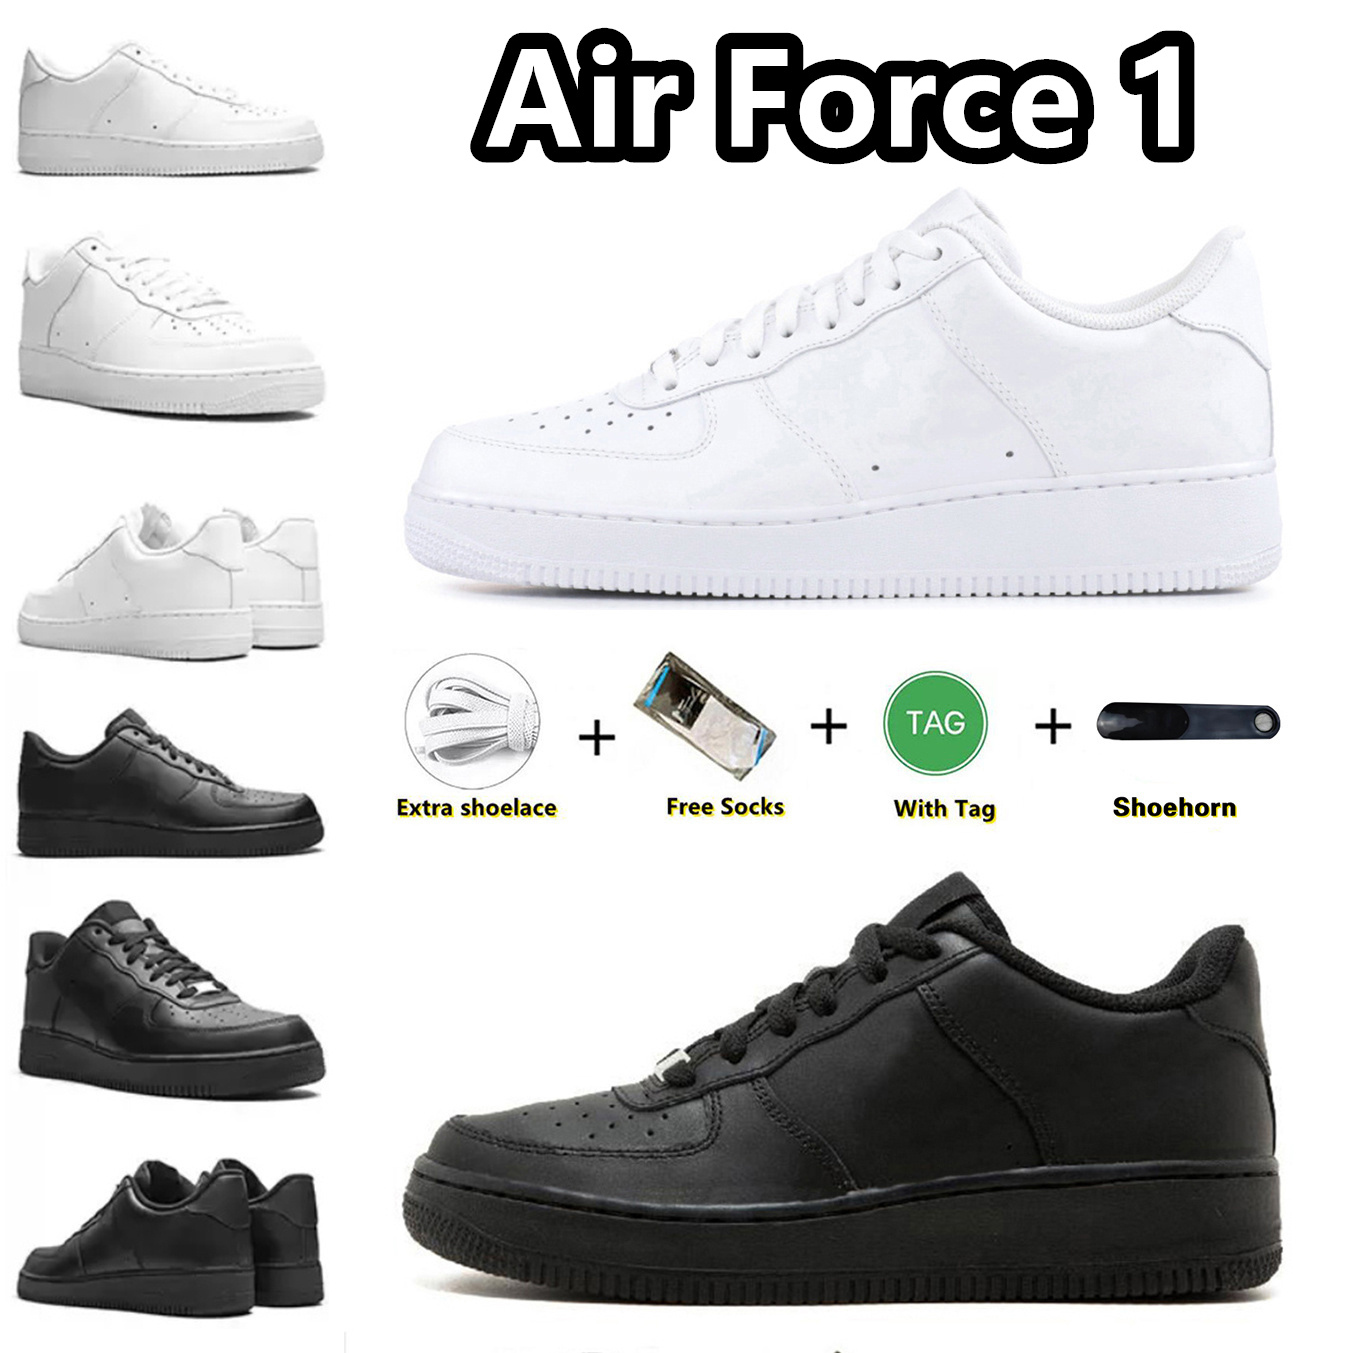 

airforce 1 Casual Shoes af1 low airforce Air''forces 1 white af1 low airforce Air''forces 1 white Black airforce 1 airforce one Trainer Sneakers for Men and Women, Item#2